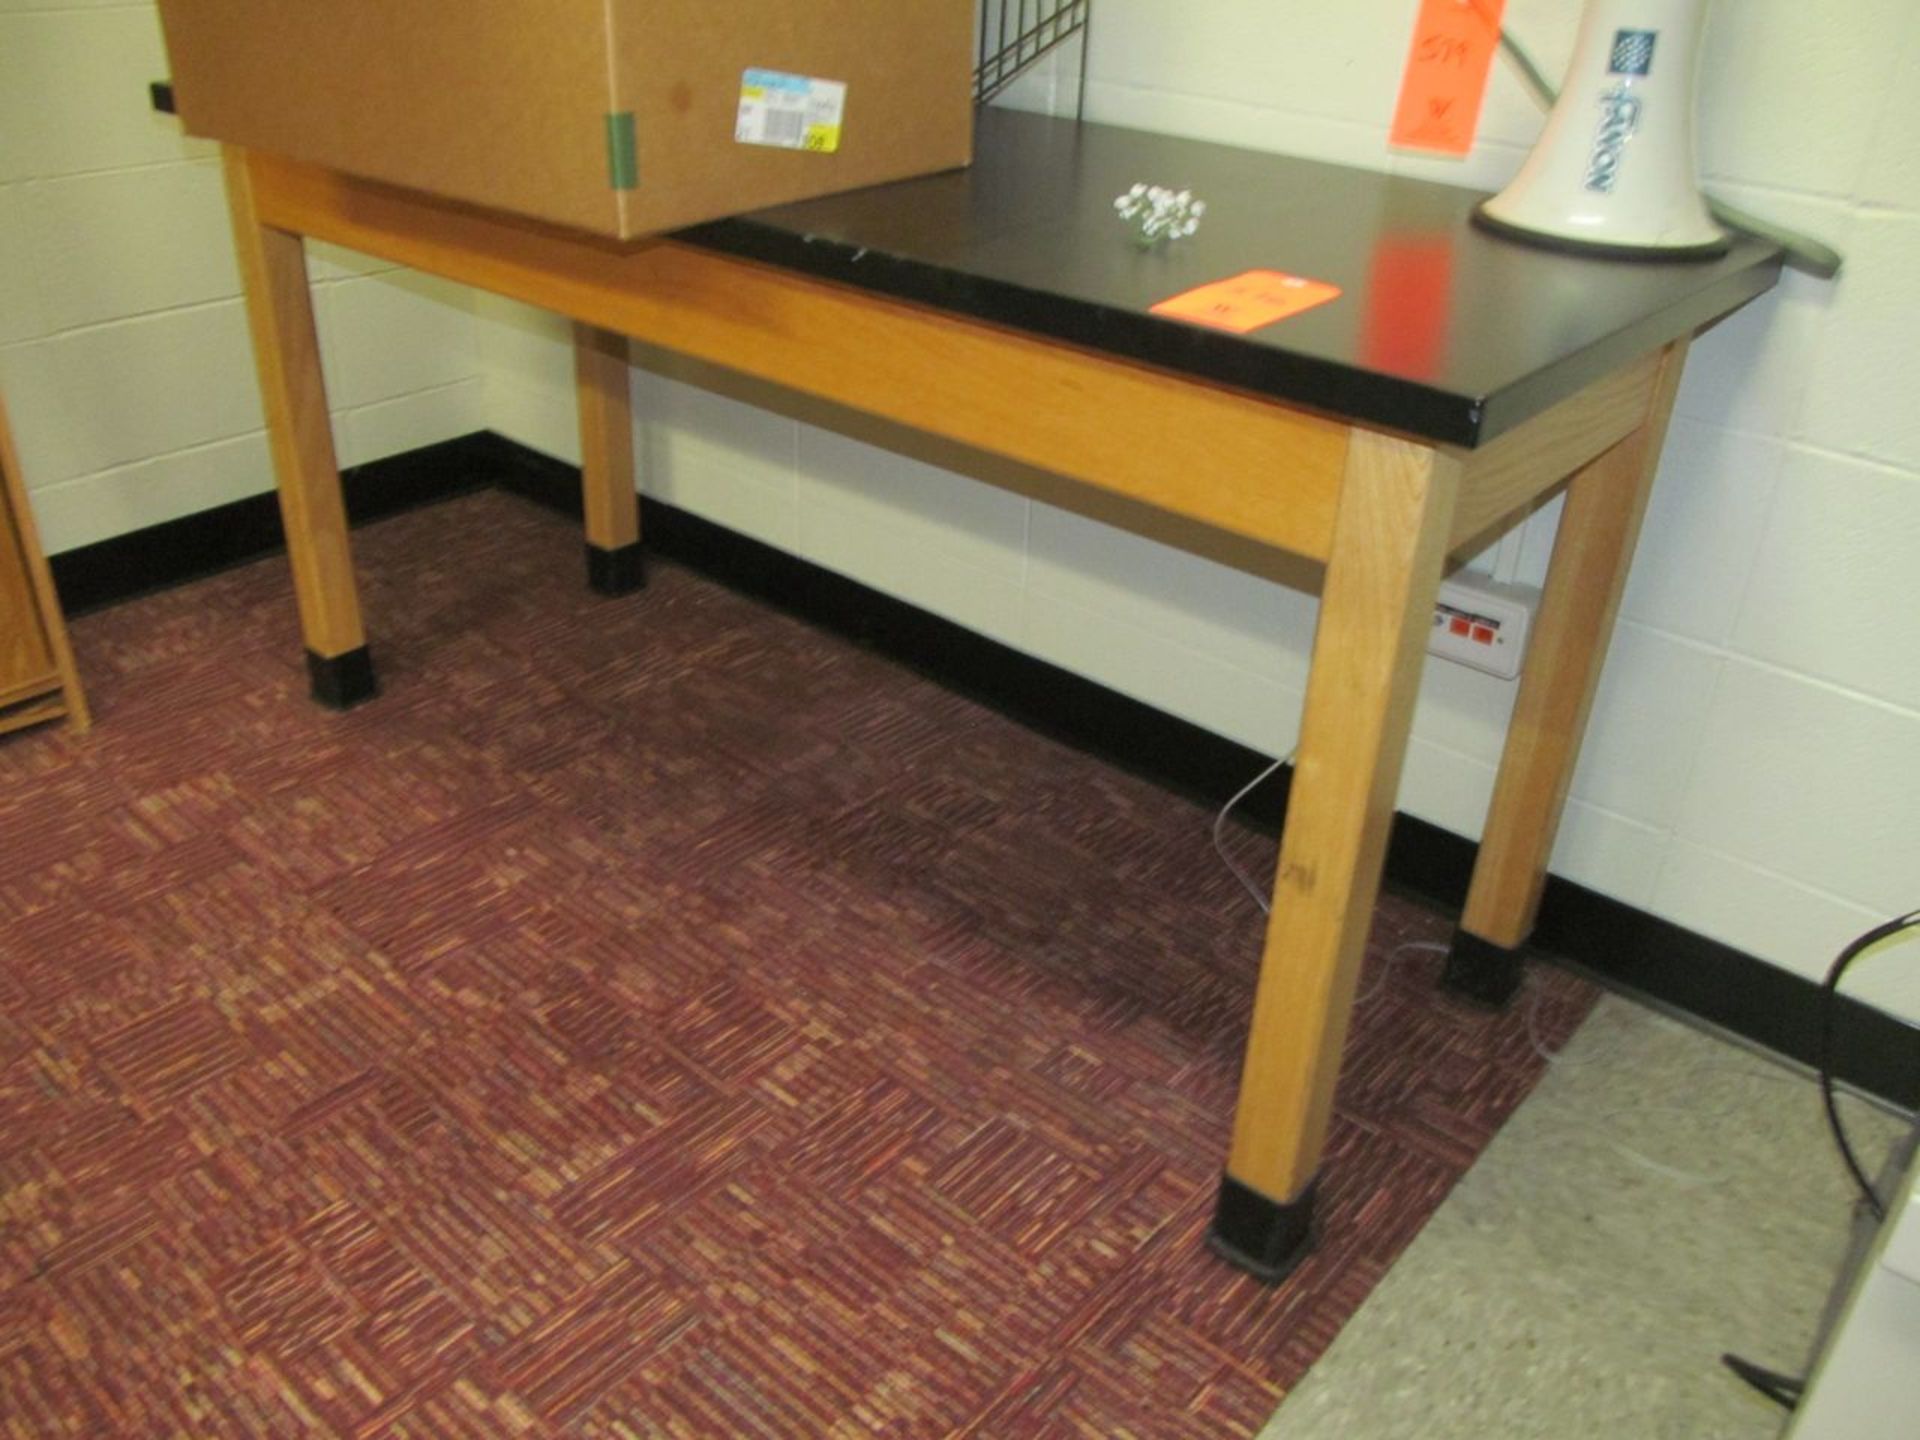 Lot - Table, Computer Table, Book Self (No Contents) (Room 410)